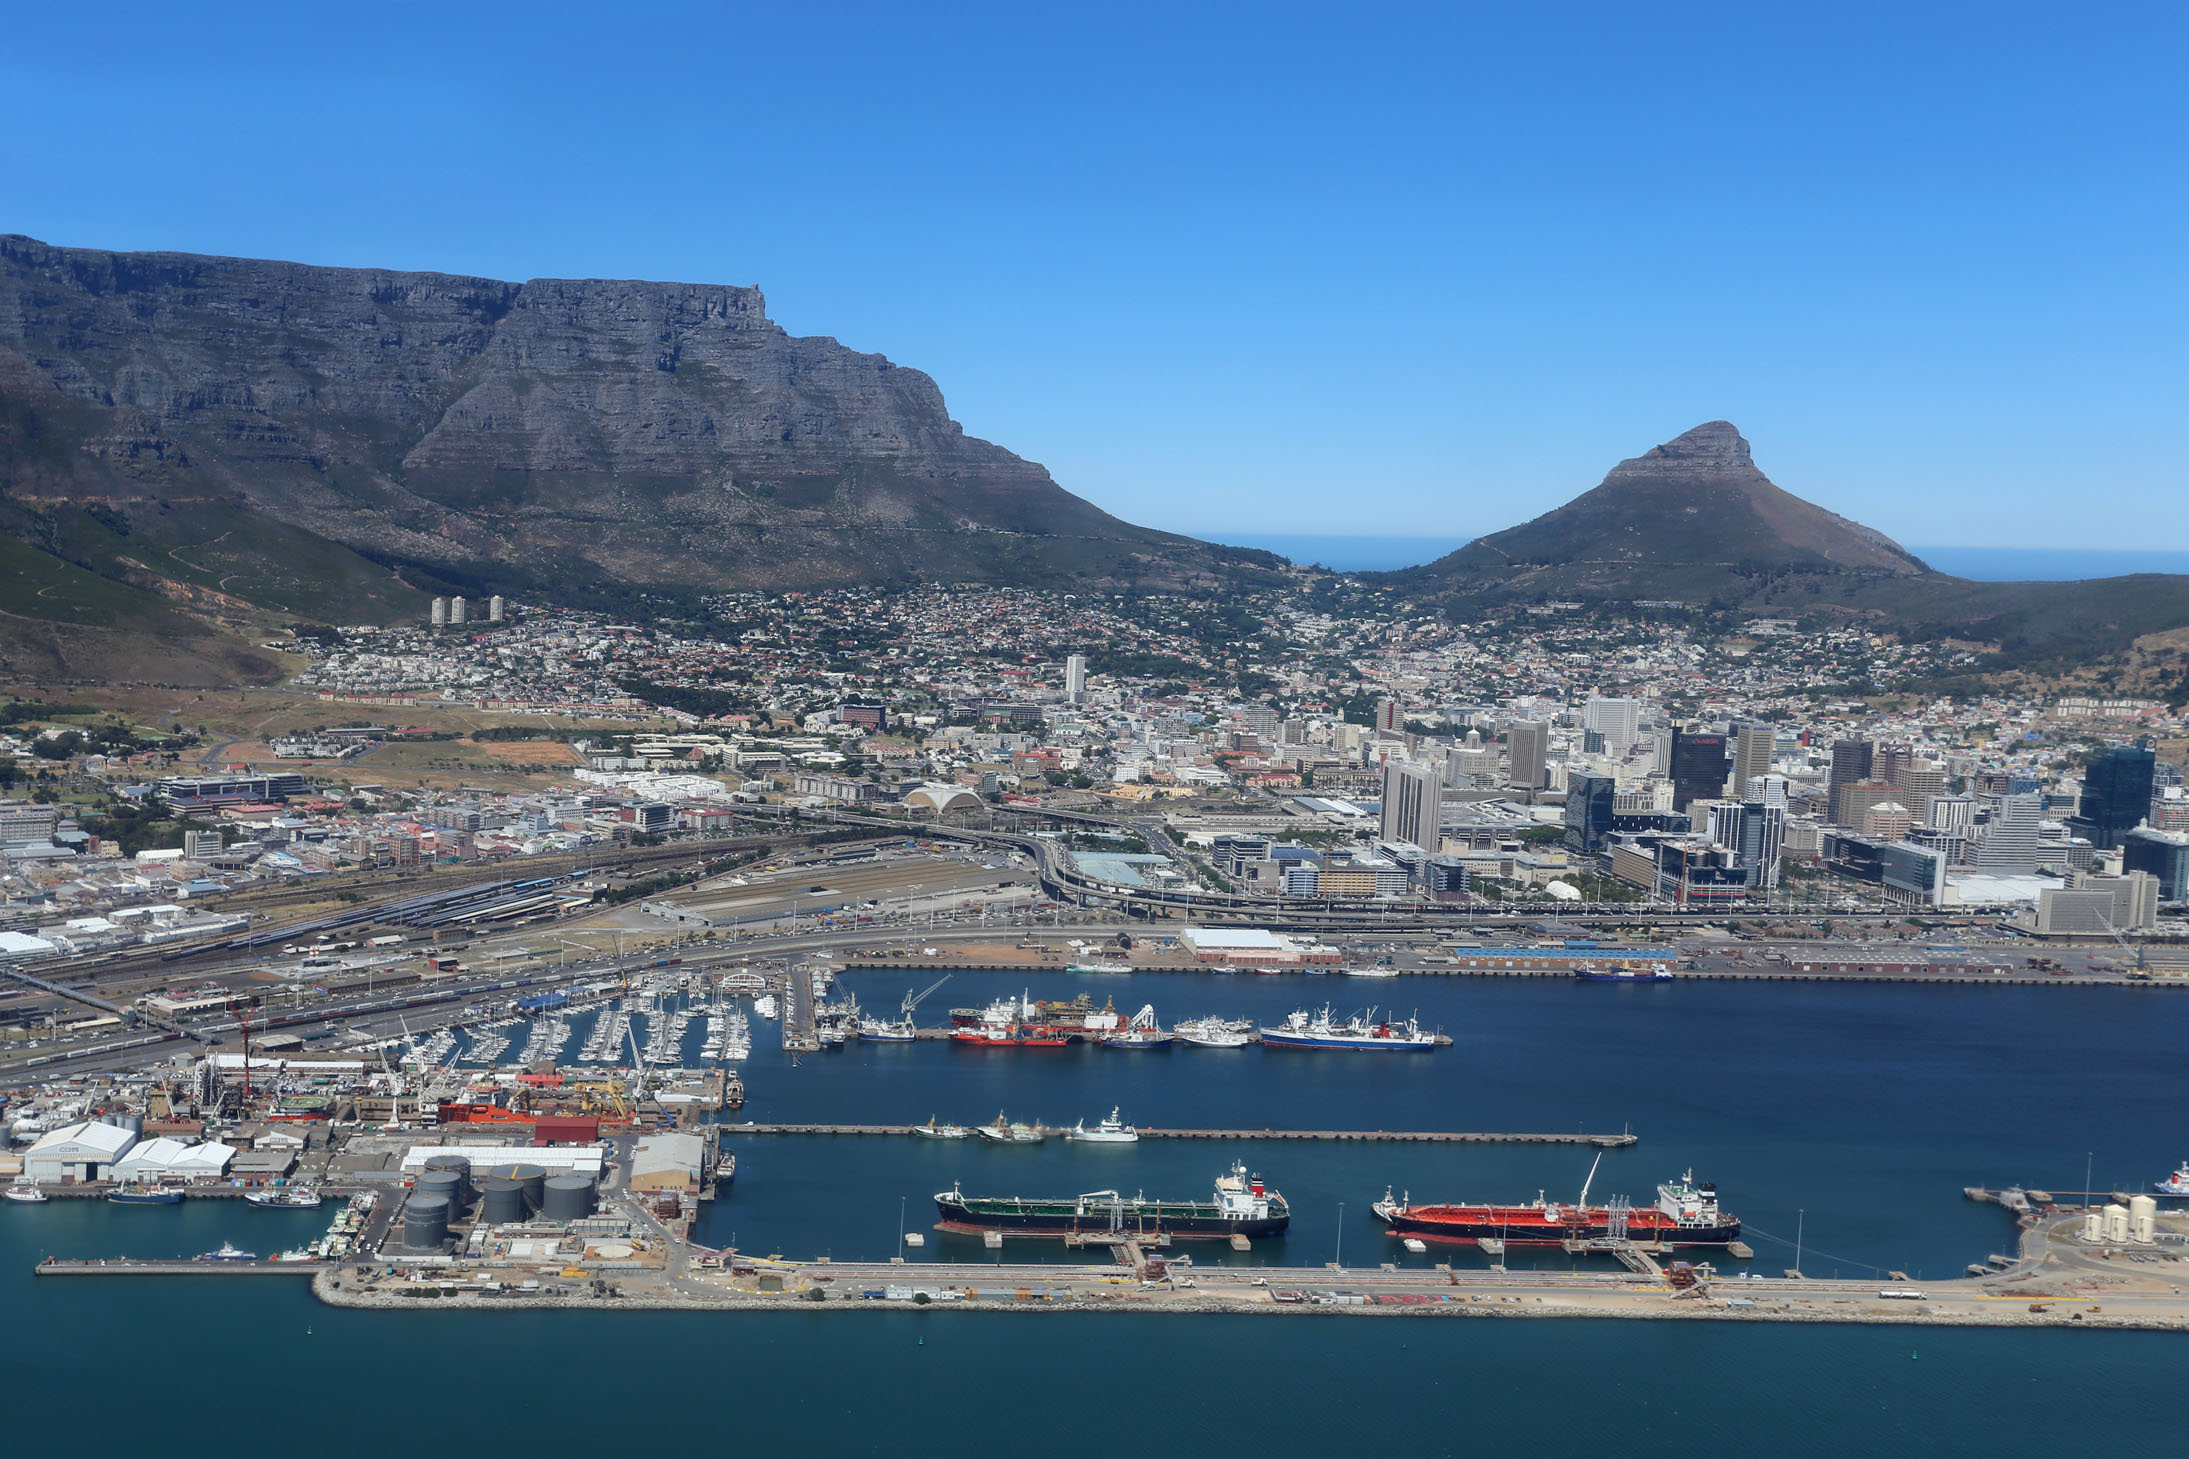 Cape Town - Harbour, Table Mountain and Lions Head